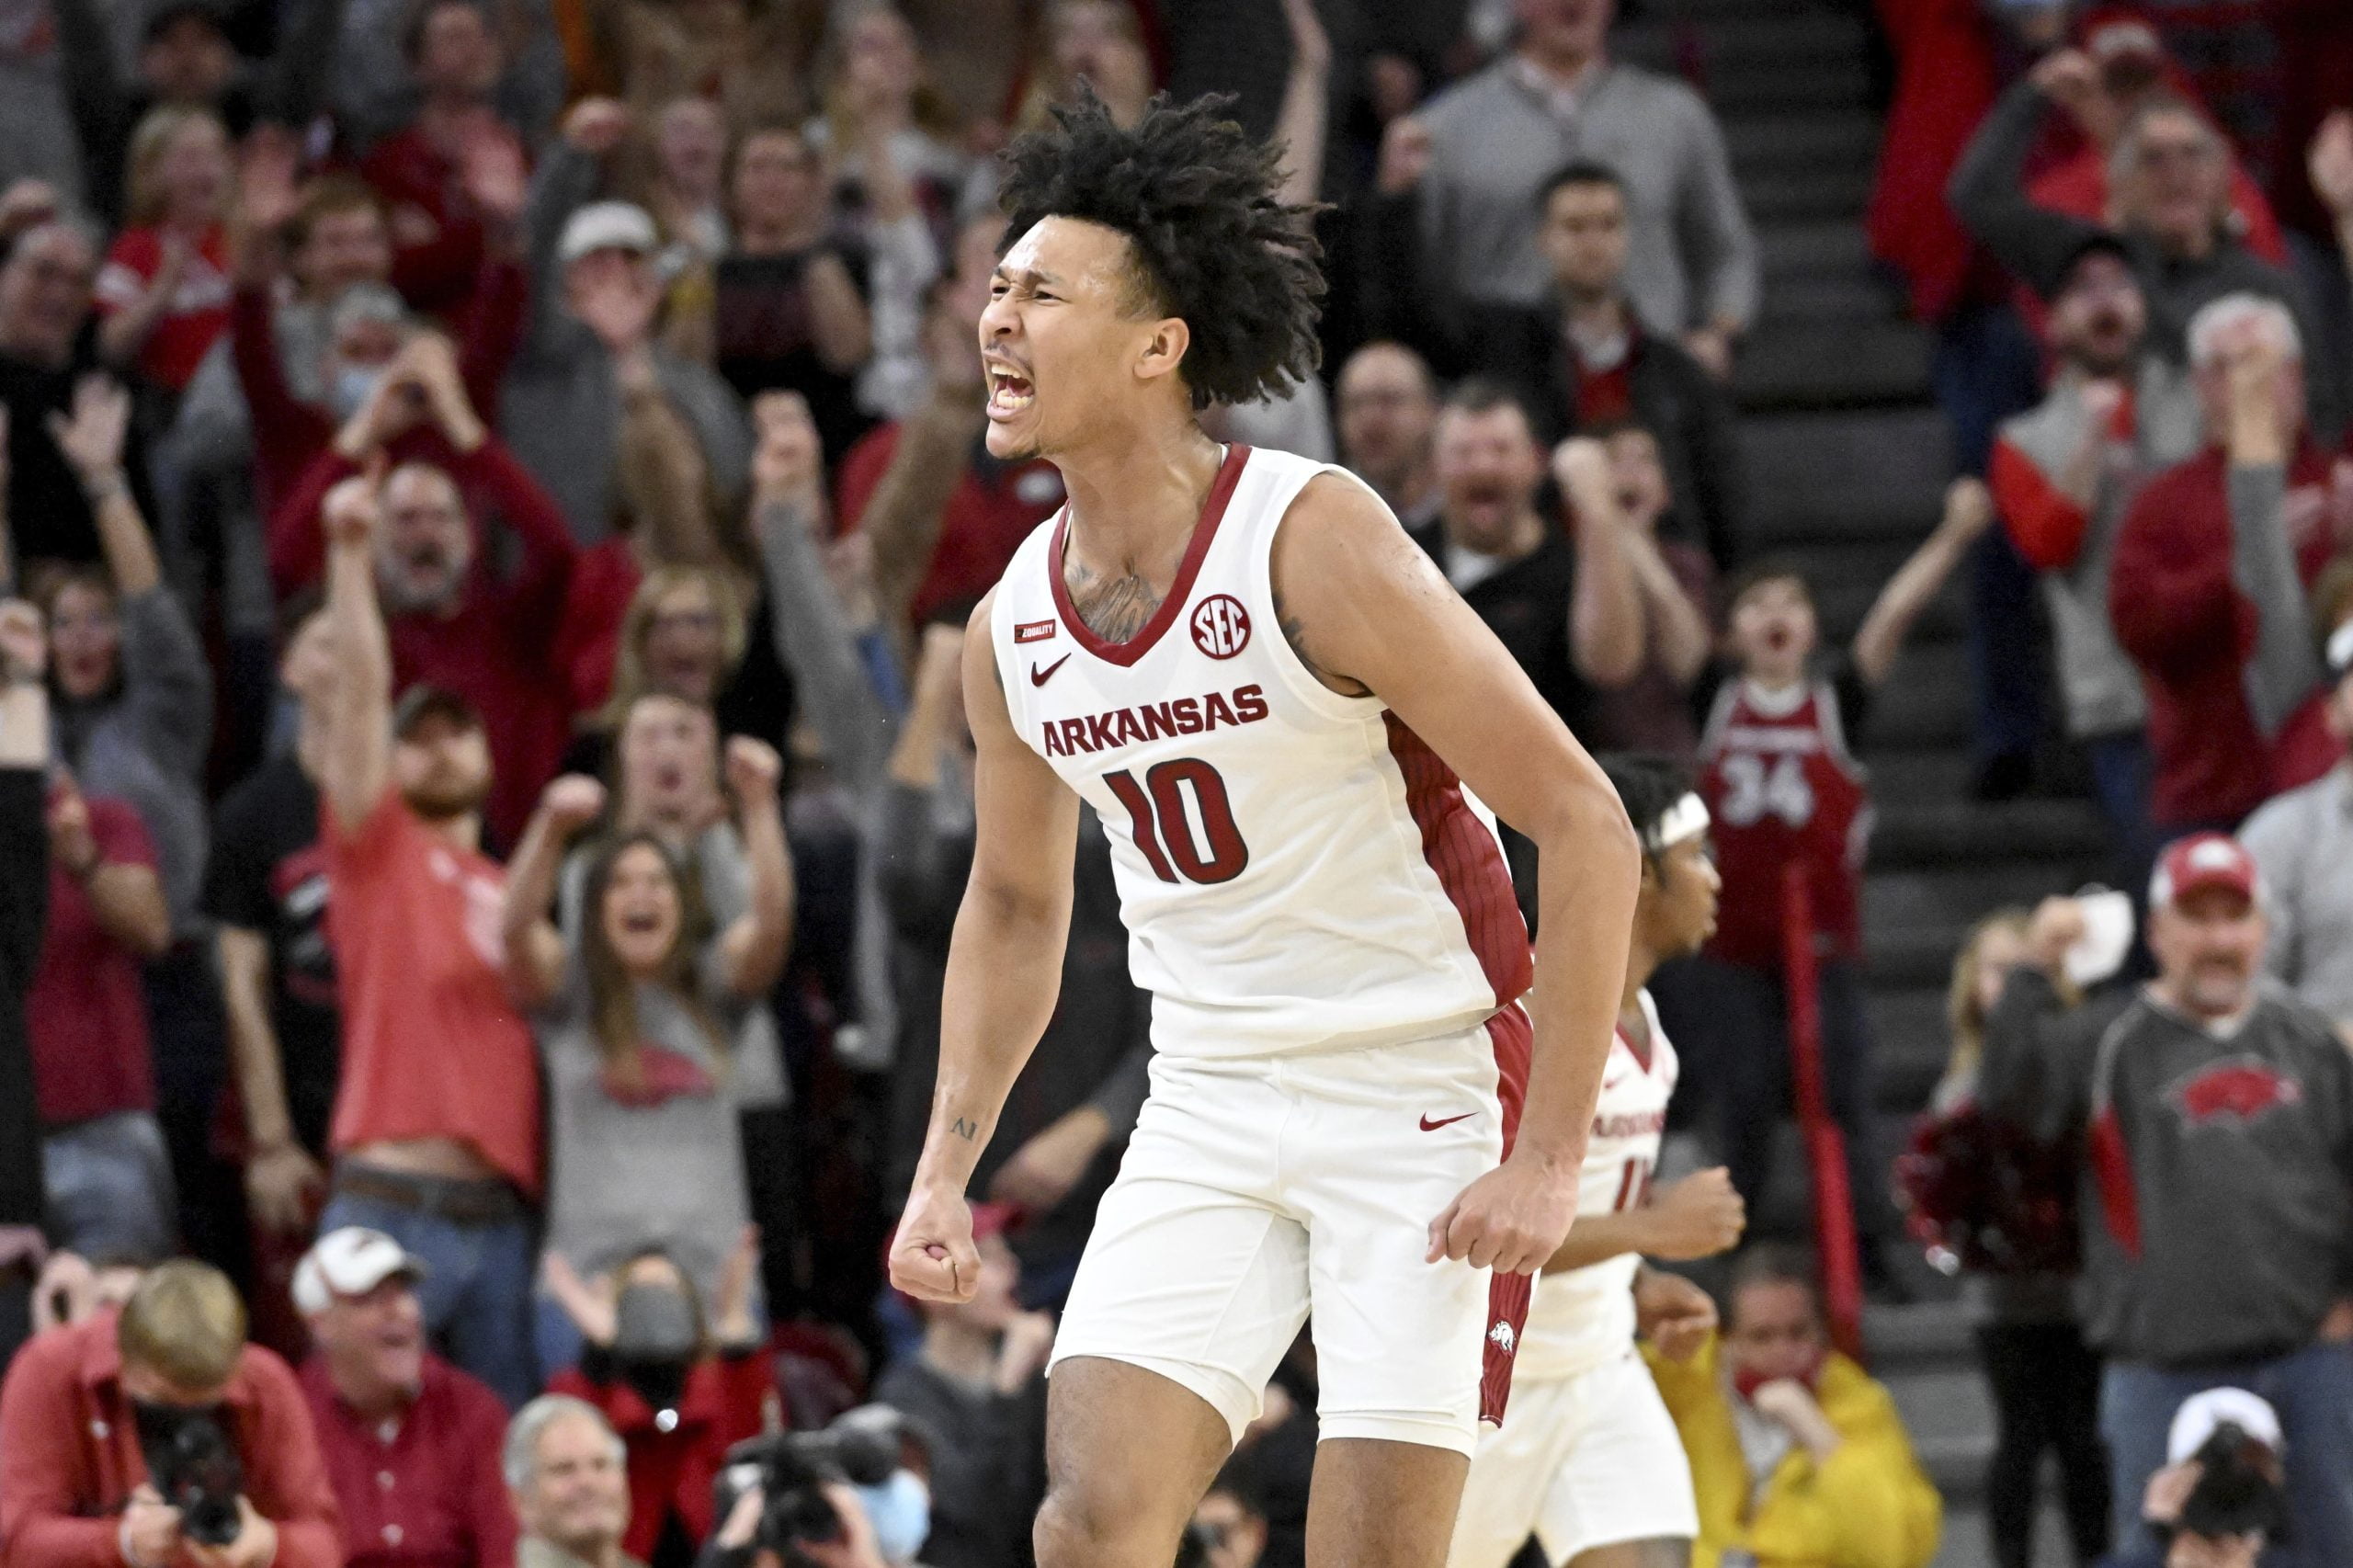 Arkansas holds off Texas A&M’s late rally, wins 76-73 in OT 3